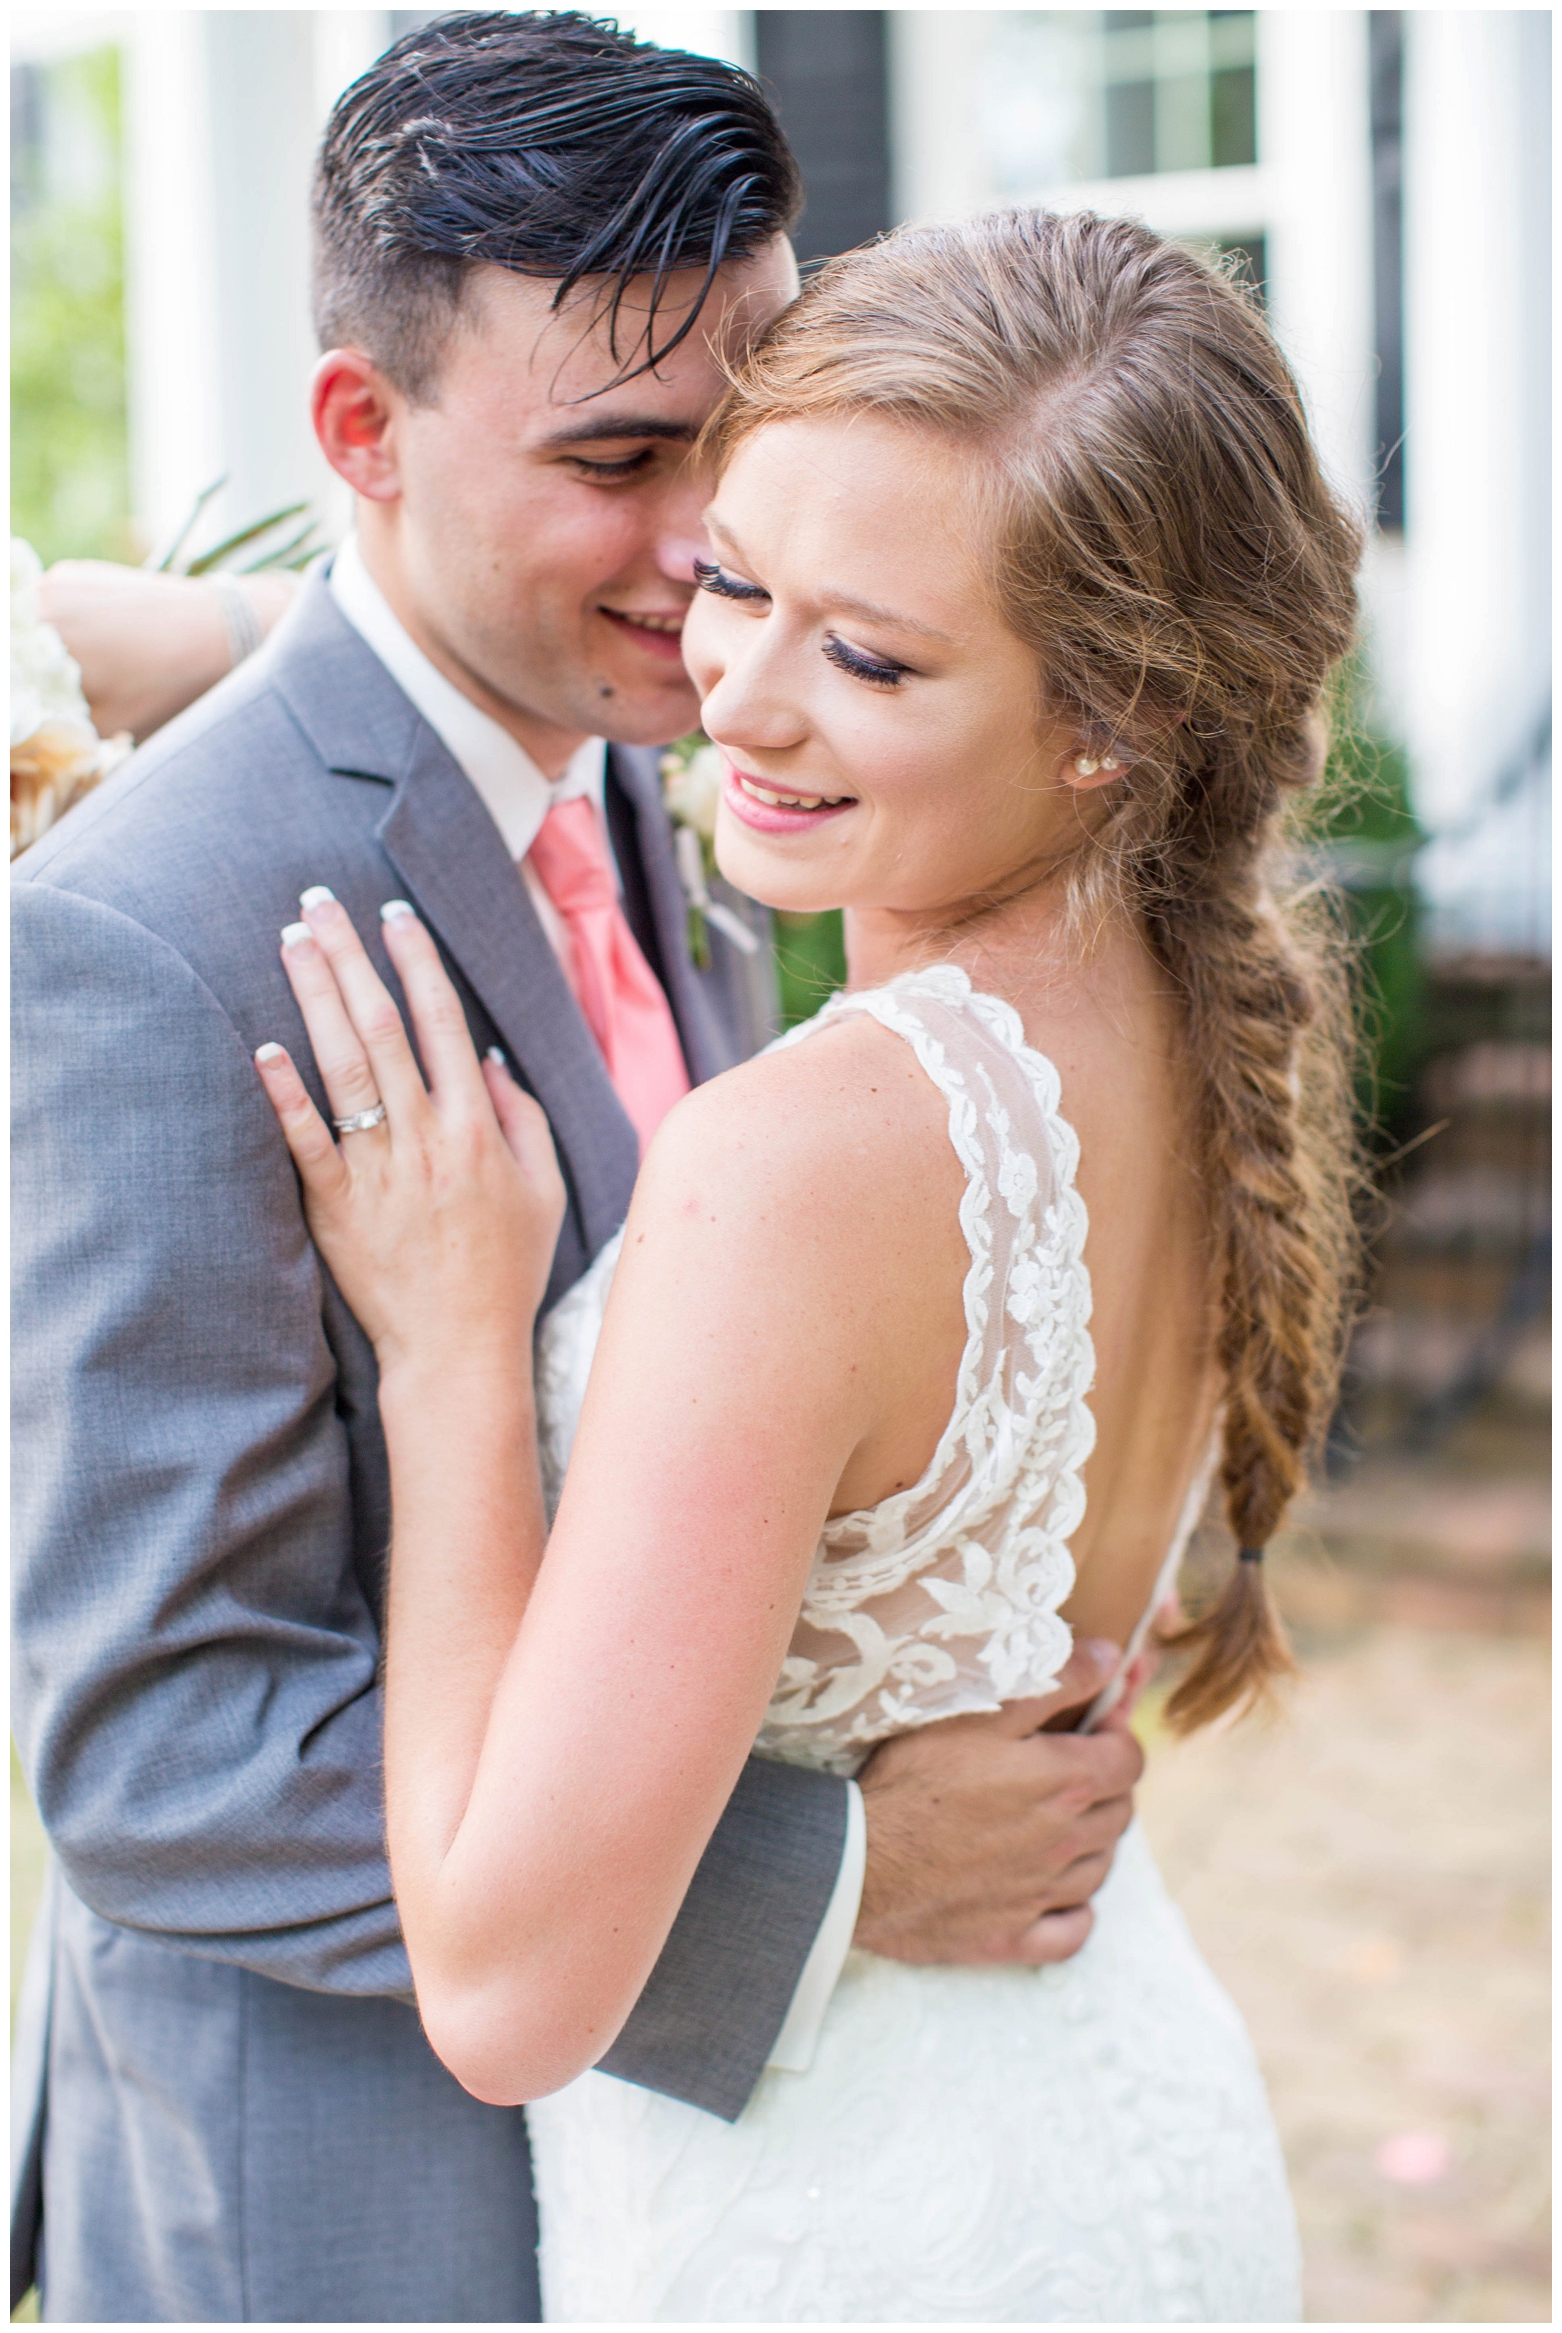 View More: http://hopetaylorphotographyphotos.pass.us/anna-and-caleb